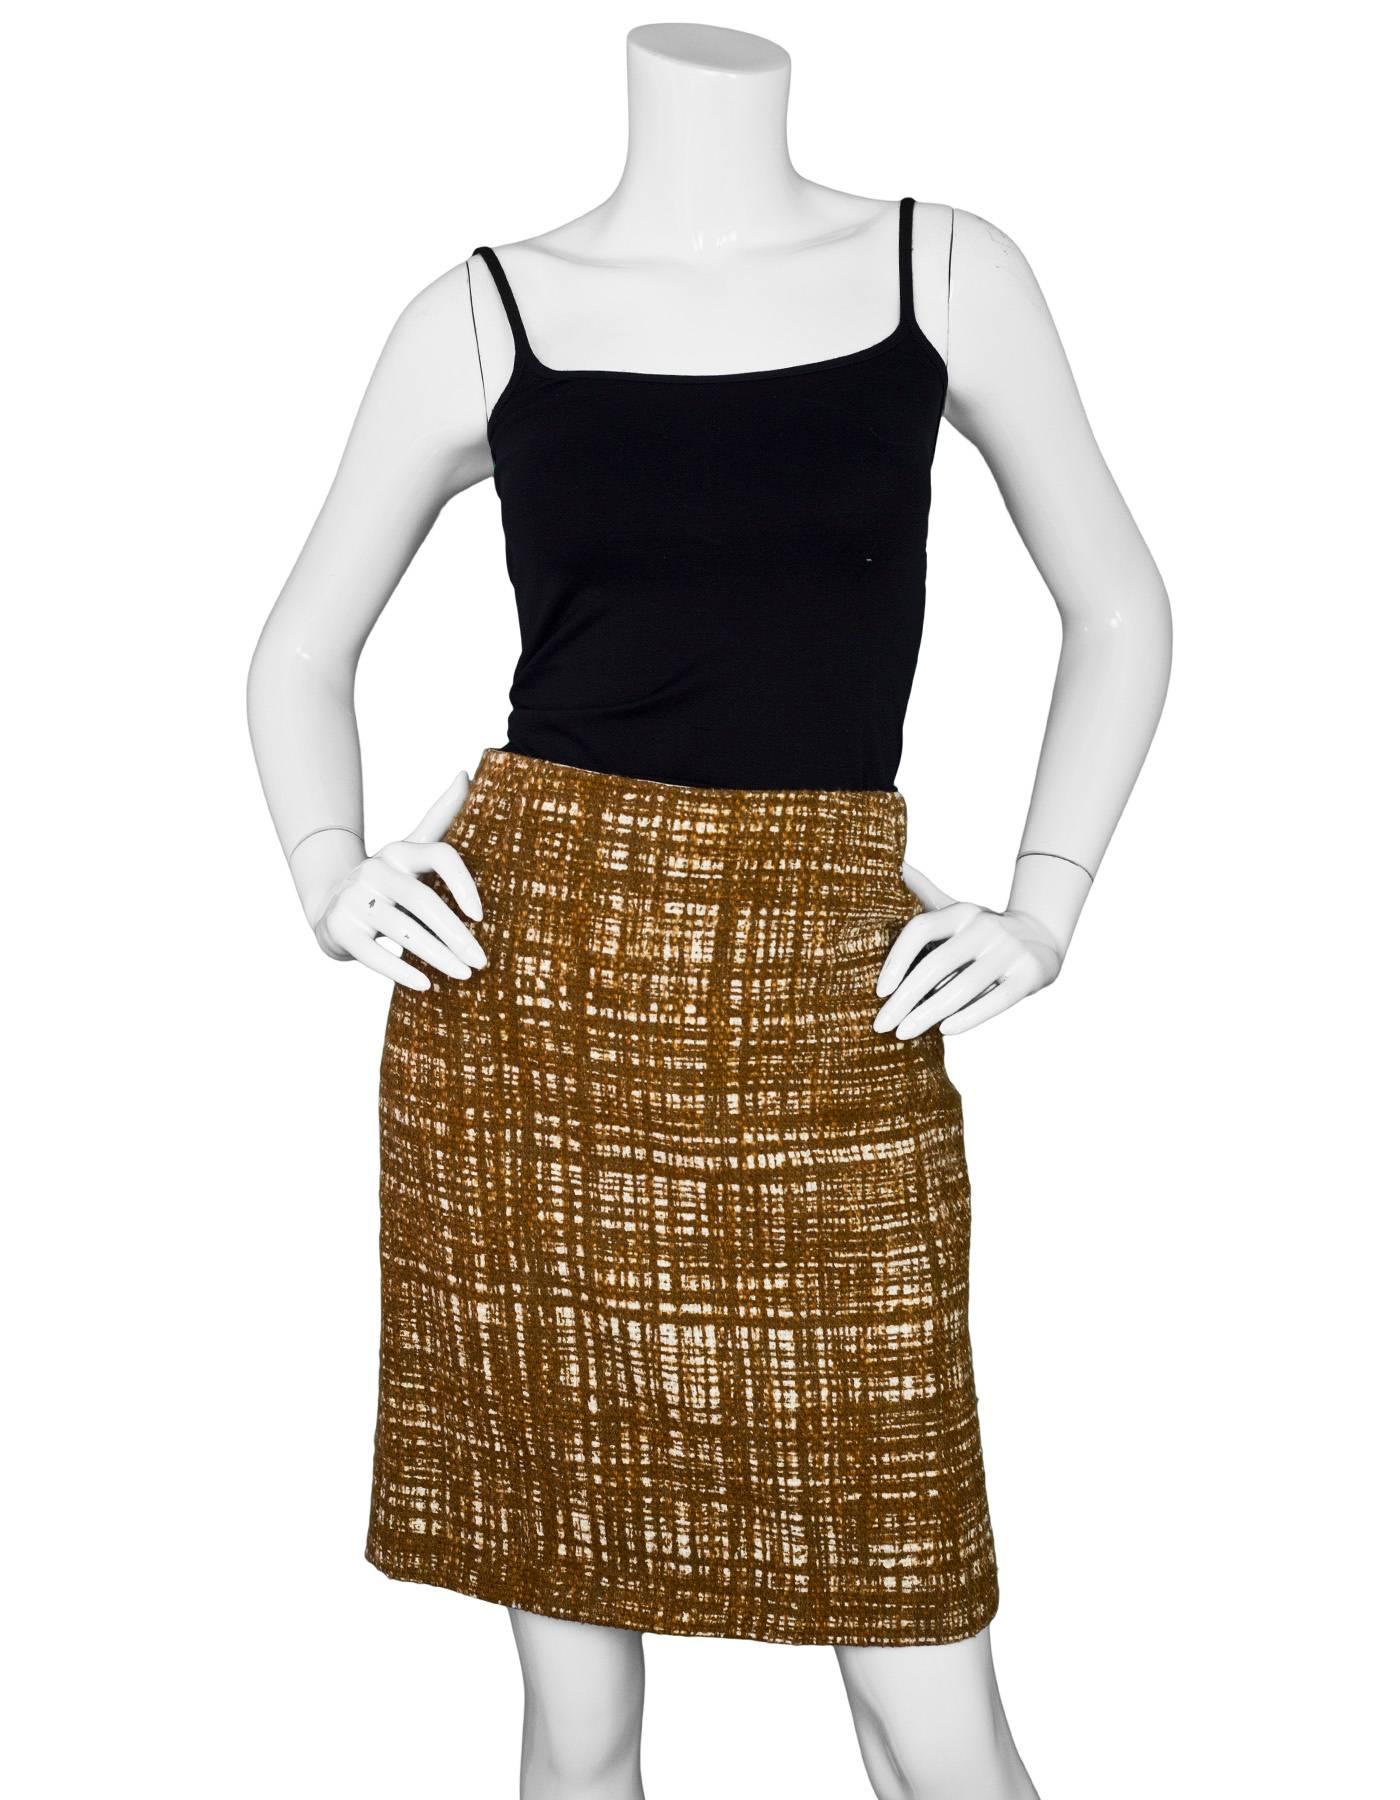 Prada Rust & Cream Tweed Skirt Sz IT48

Made In: Italy
Color: Rust, cream
Composition: 50% cotton, 50% linen
Lining: White textile
Closure/Opening: Side zip closure
Overall Condition: Excellentpre-owned condition, some yellowing at interior